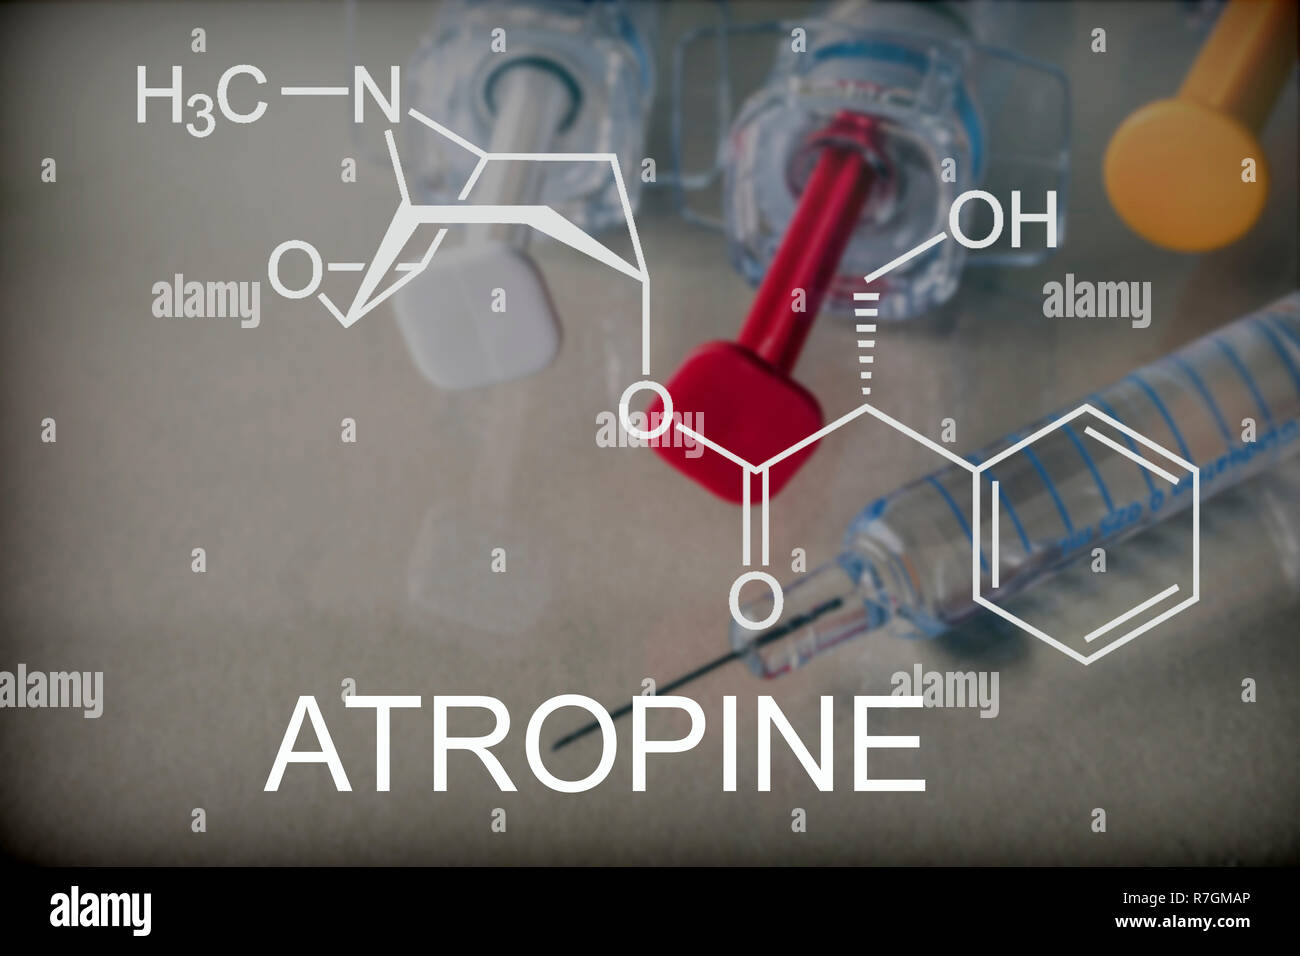 Chemical composition of atropine, conceptual image Stock Photo